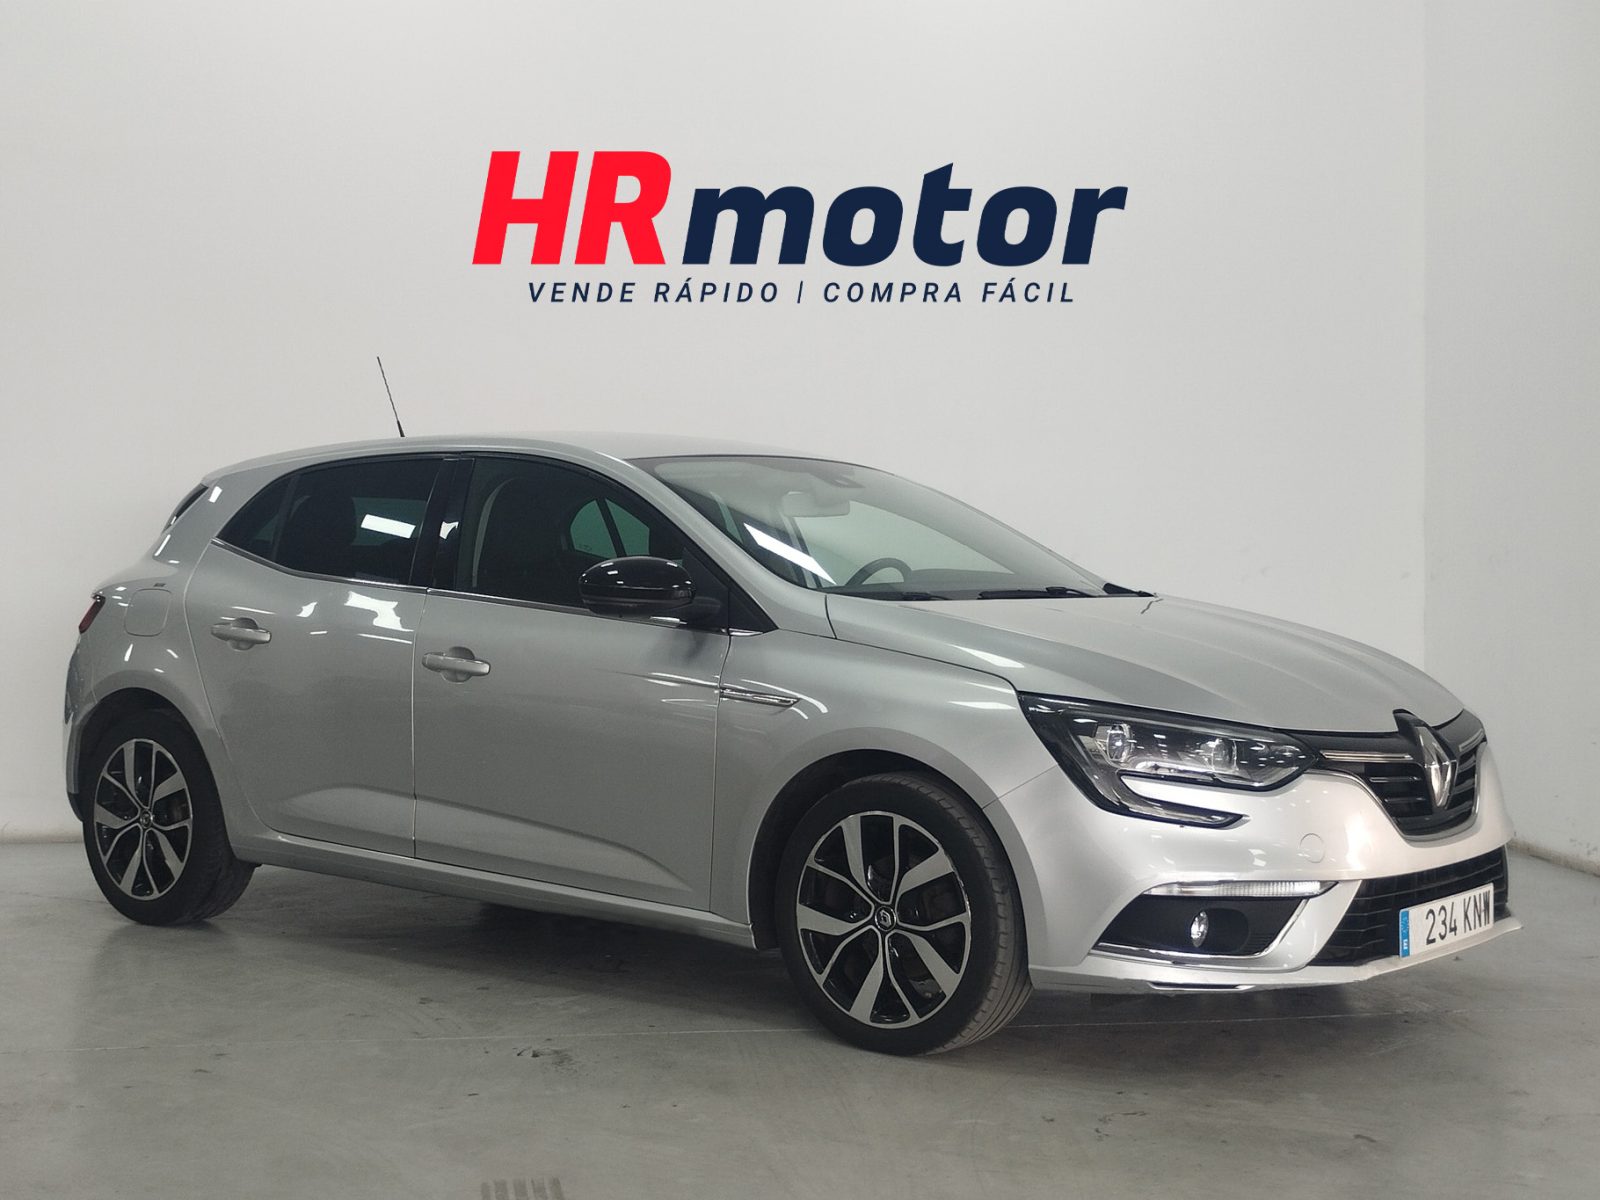 RENAULT MEGANE III (3) 1.2 TCE 115 LIMITED - Entreprise mb auto